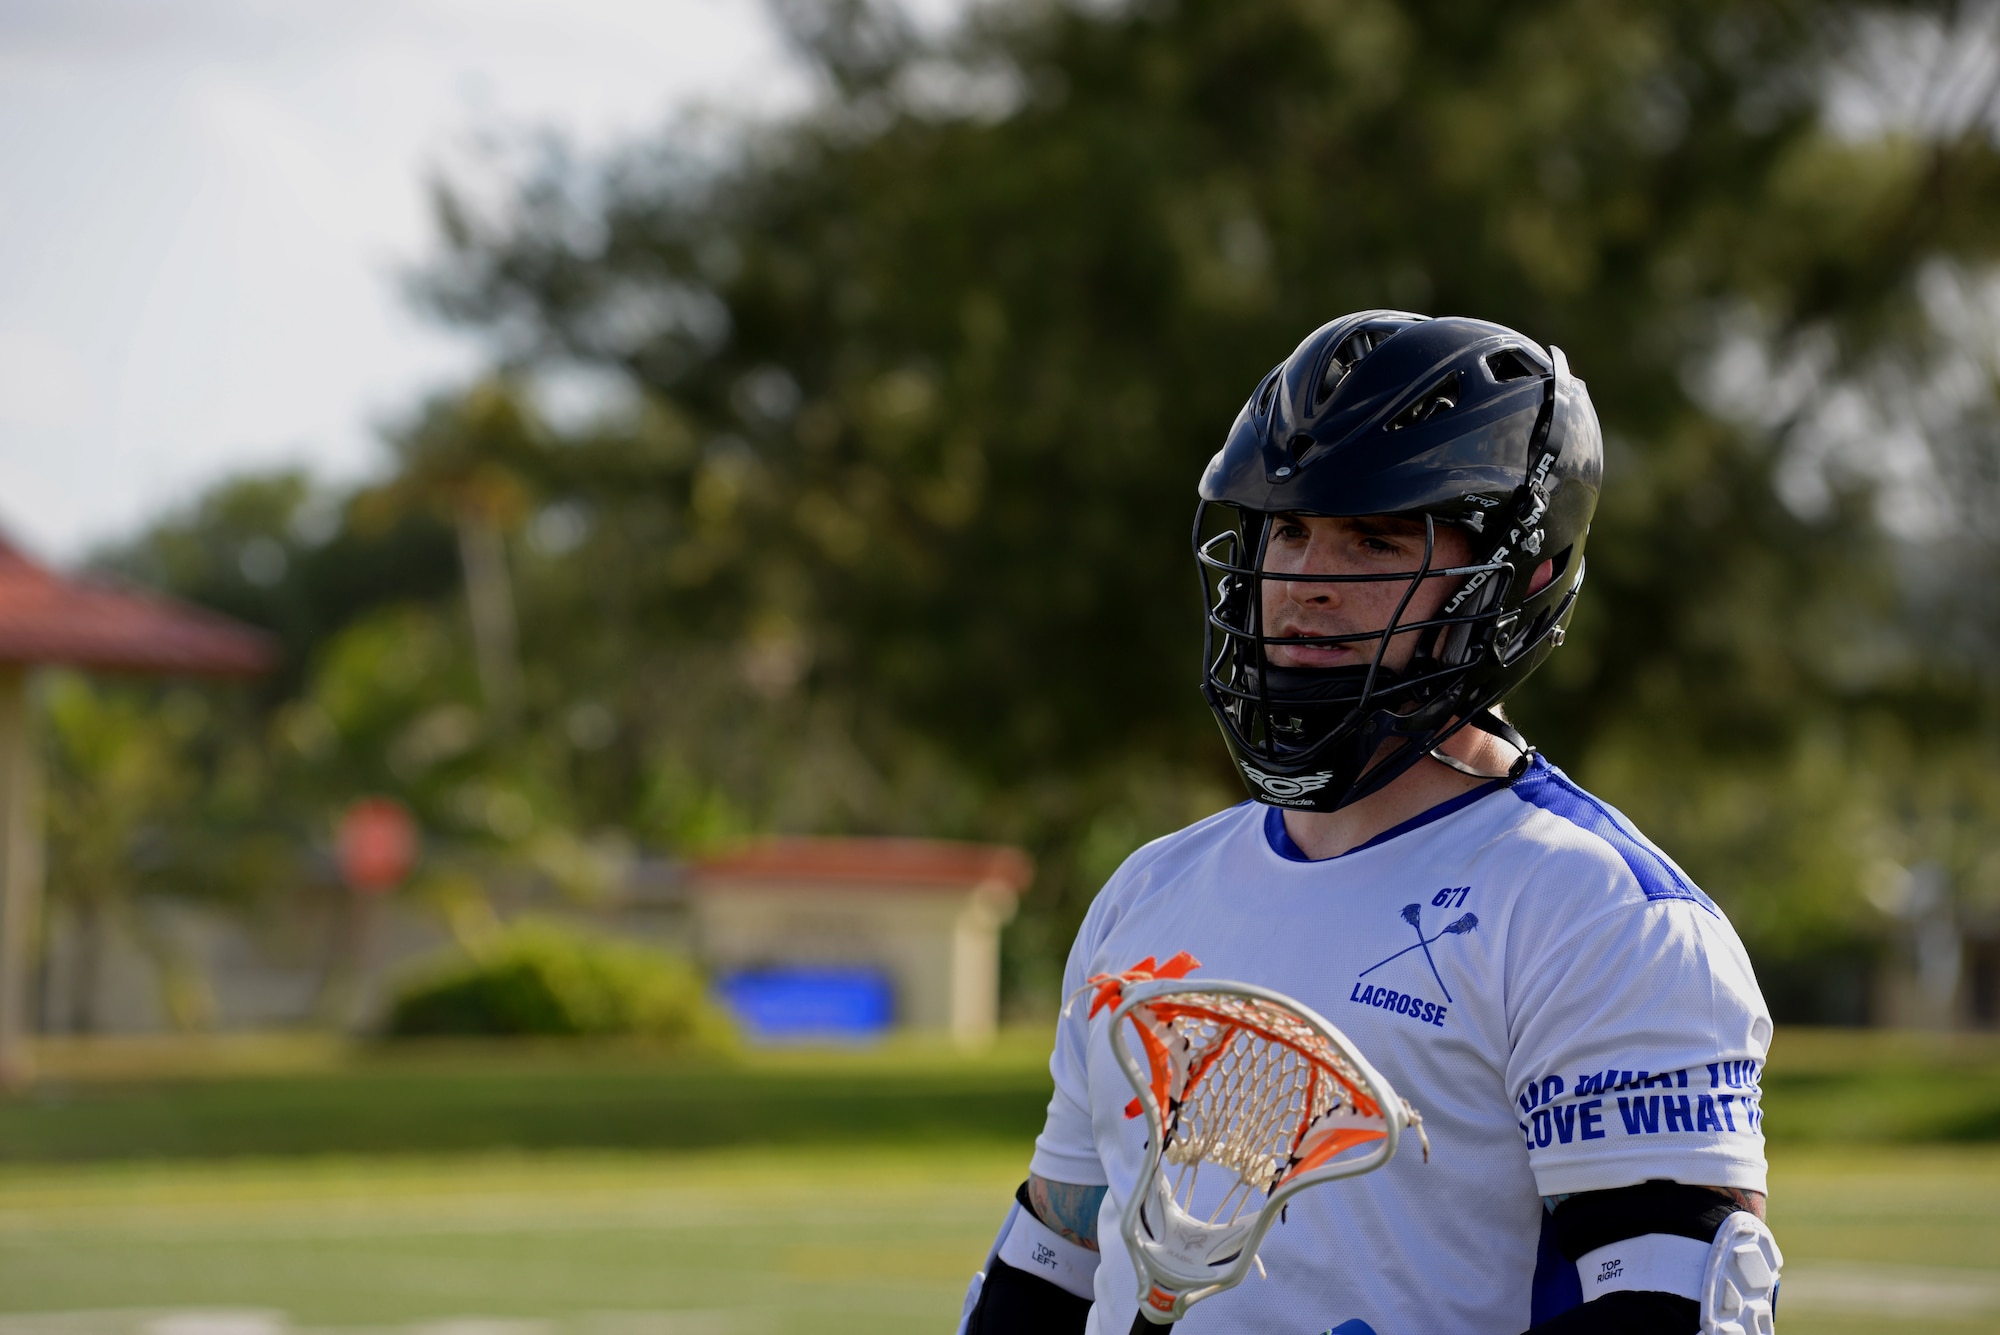 U.S. Air Force Staff Sgt. Travis Ringer, a member of the Guam Black tips Lacrosse team, practices lacrosse Jan. 8, 2016, at Andersen Air Force Base, Guam. Guam’s first and only lacrosse team brings new opportunities to stay in shape and build team work. Ringer is a group reservation supervisor with the 36th Force Support Squadron.  (U.S. Air Force photo by Airman 1st Class Gerald R. Willis)